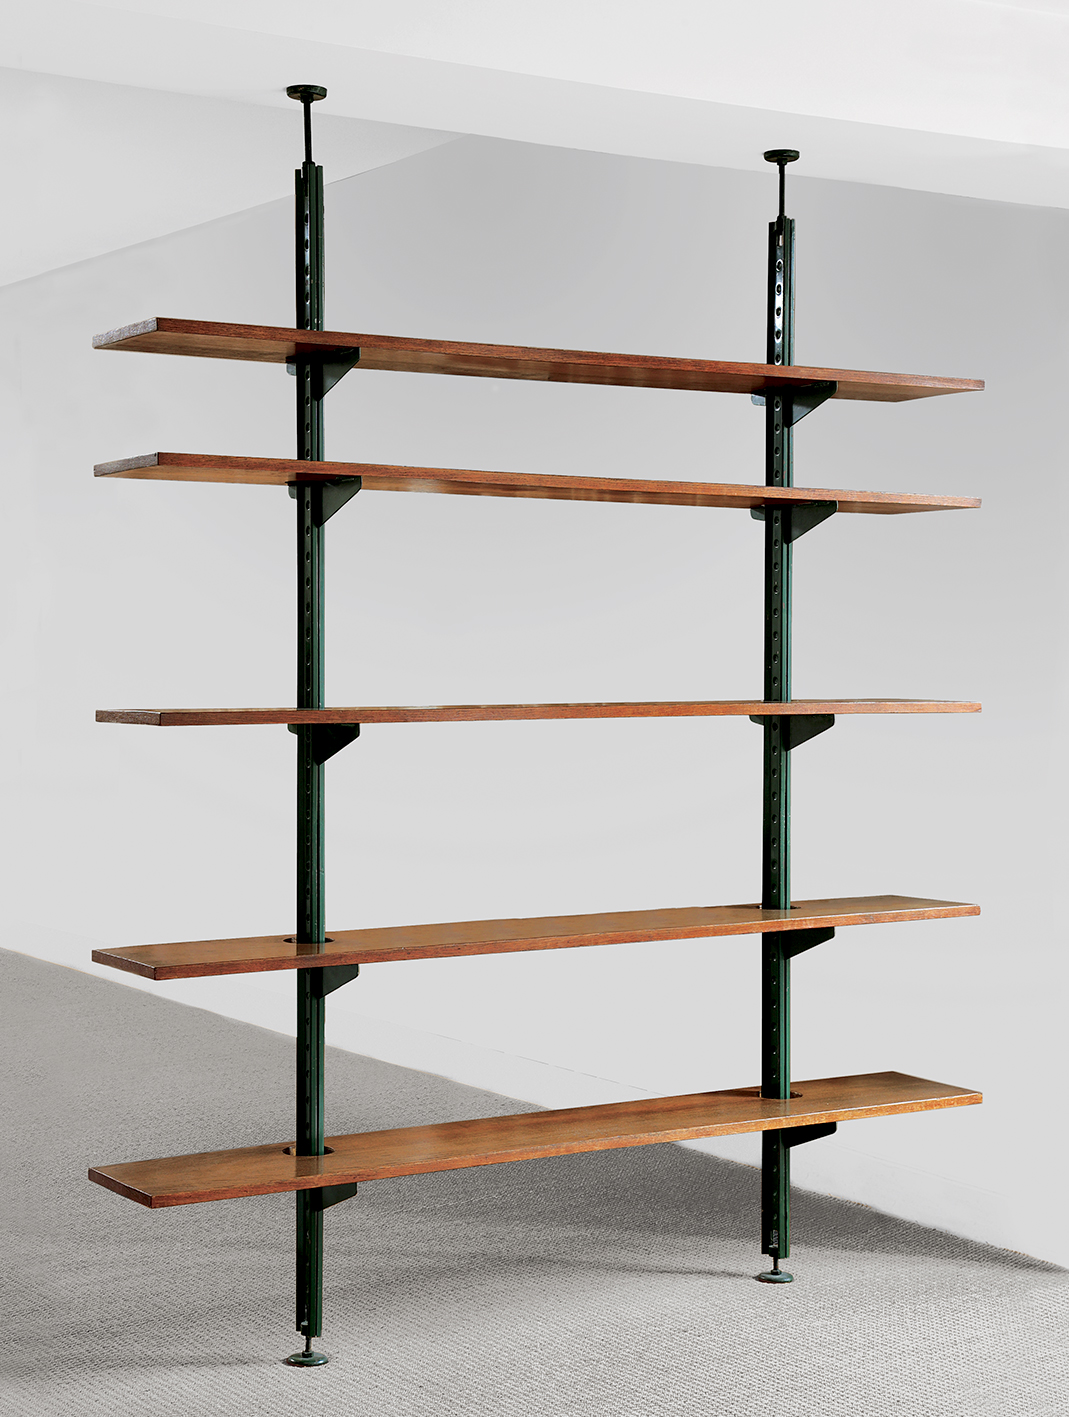 Shelves with support-channels and brackets, on pistons, balanced variant with double consoles, notched tablets, 1951. Provenance: Dollander Villa, Saint-Clair, Var.